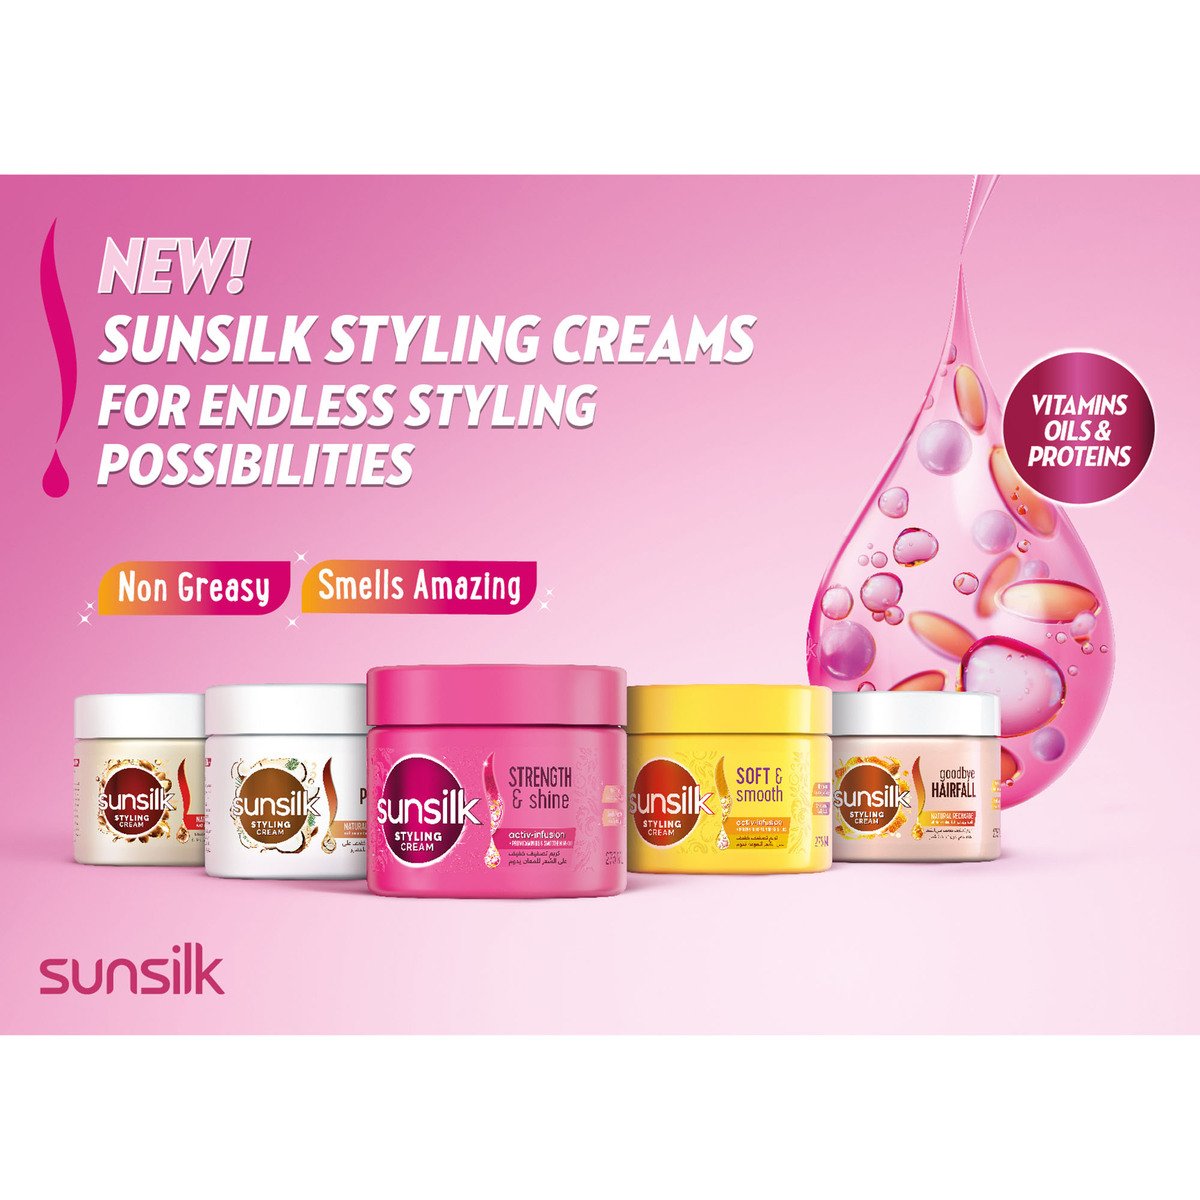 Sunsilk Frizz Proof Styling Cream With Coconut Oil 275 ml